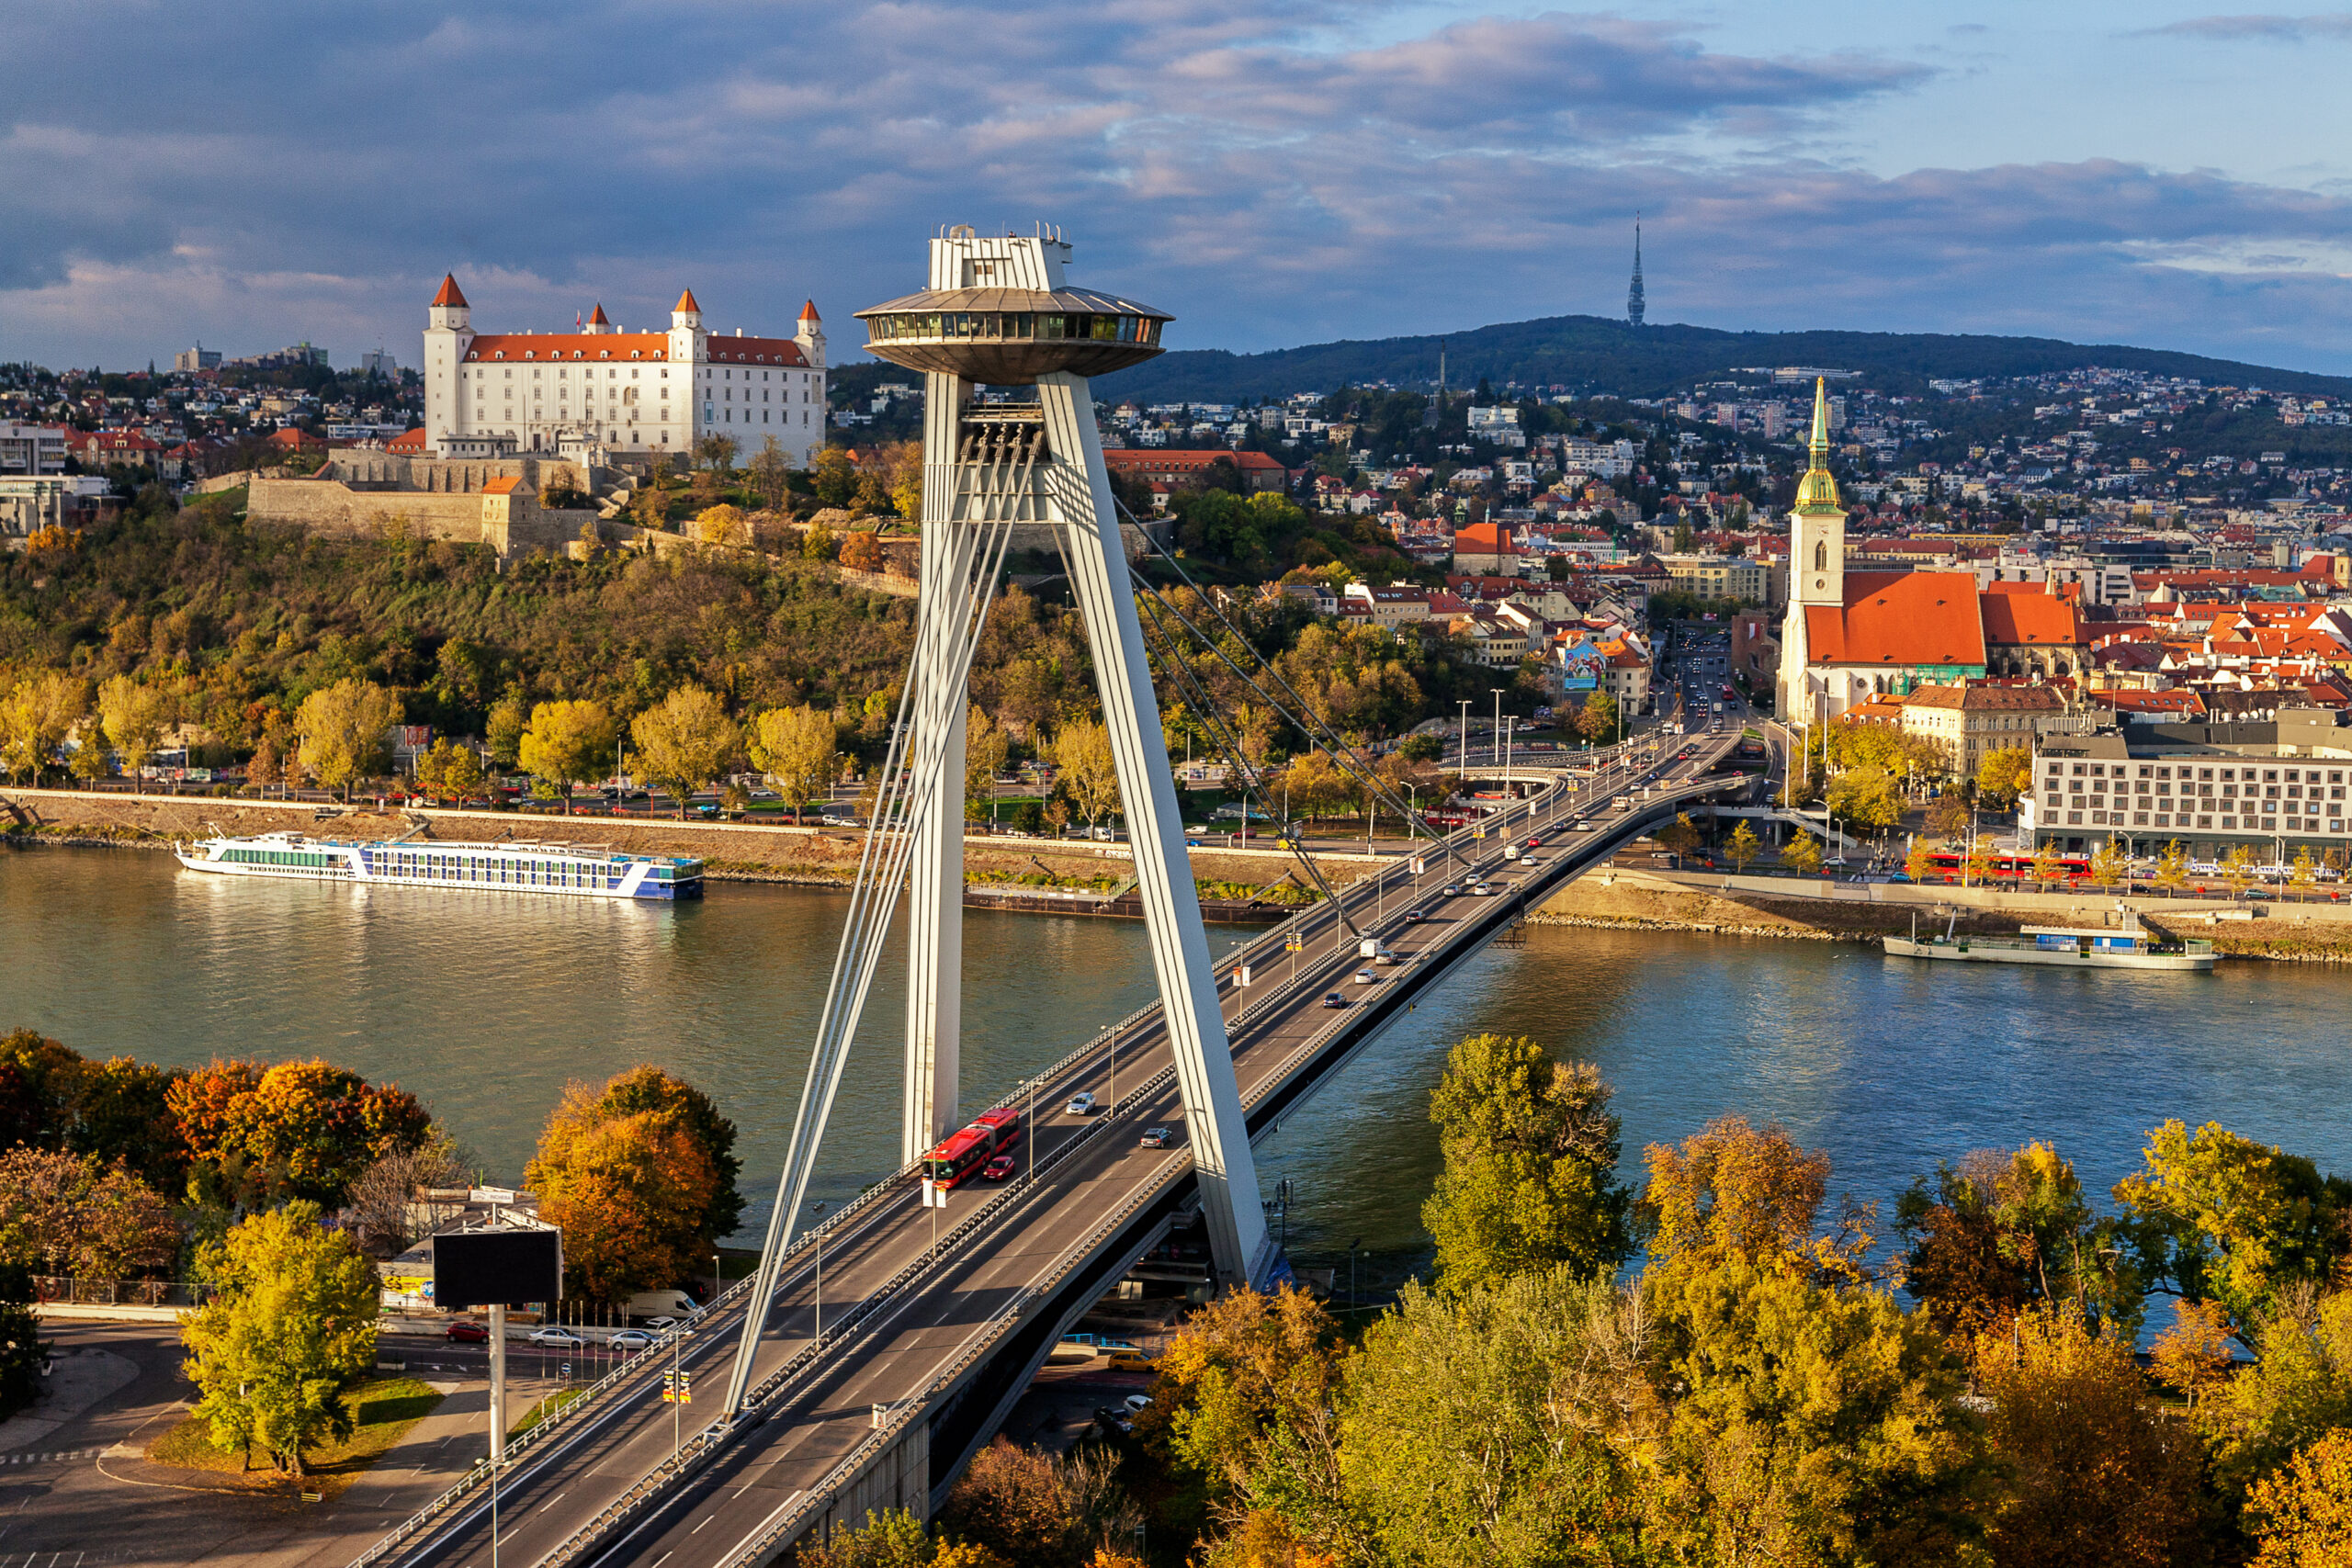 production-services-and-filming-in-slovakia-city-view-with-bridge